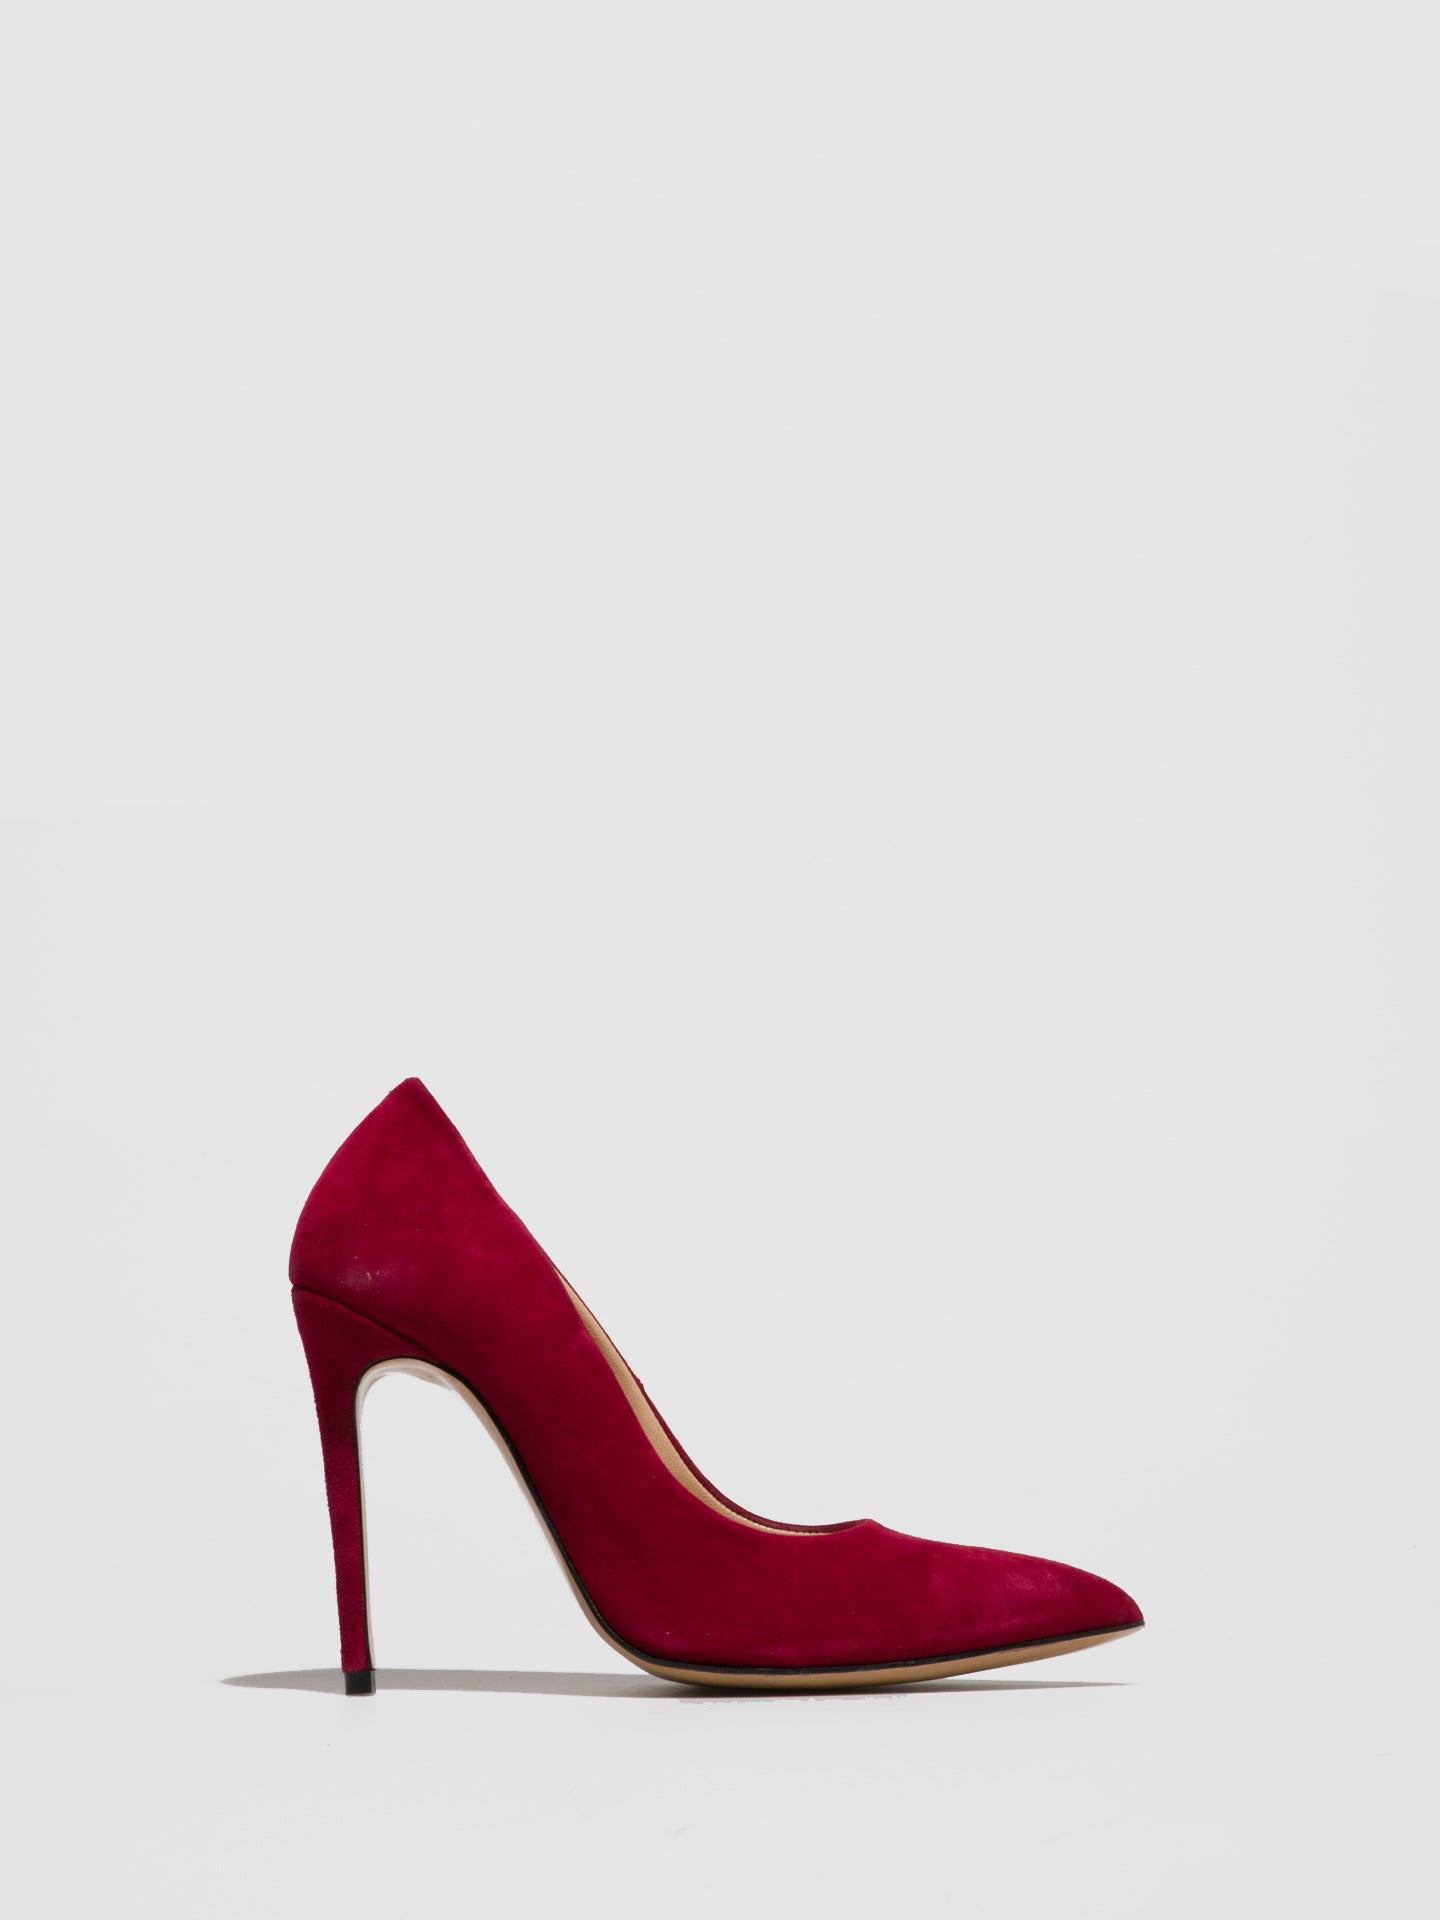 Foreva Crimson Pointed Toe Shoes